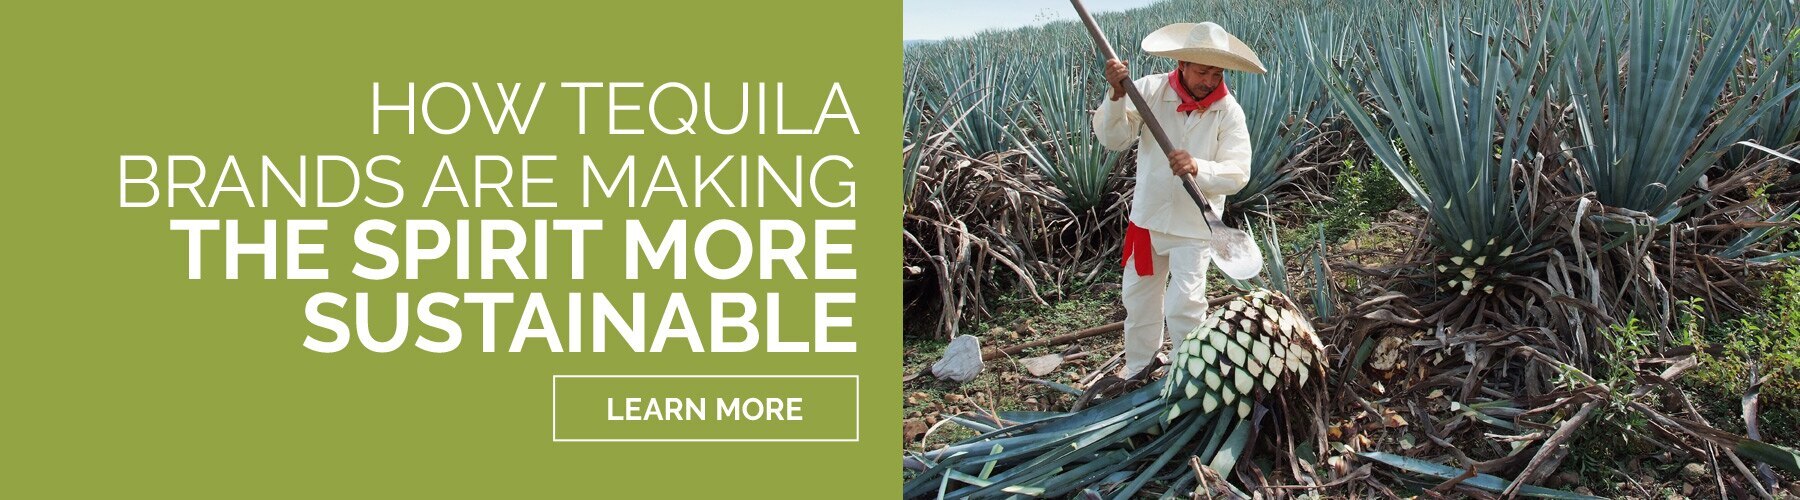 Learn More and Shop Tequila